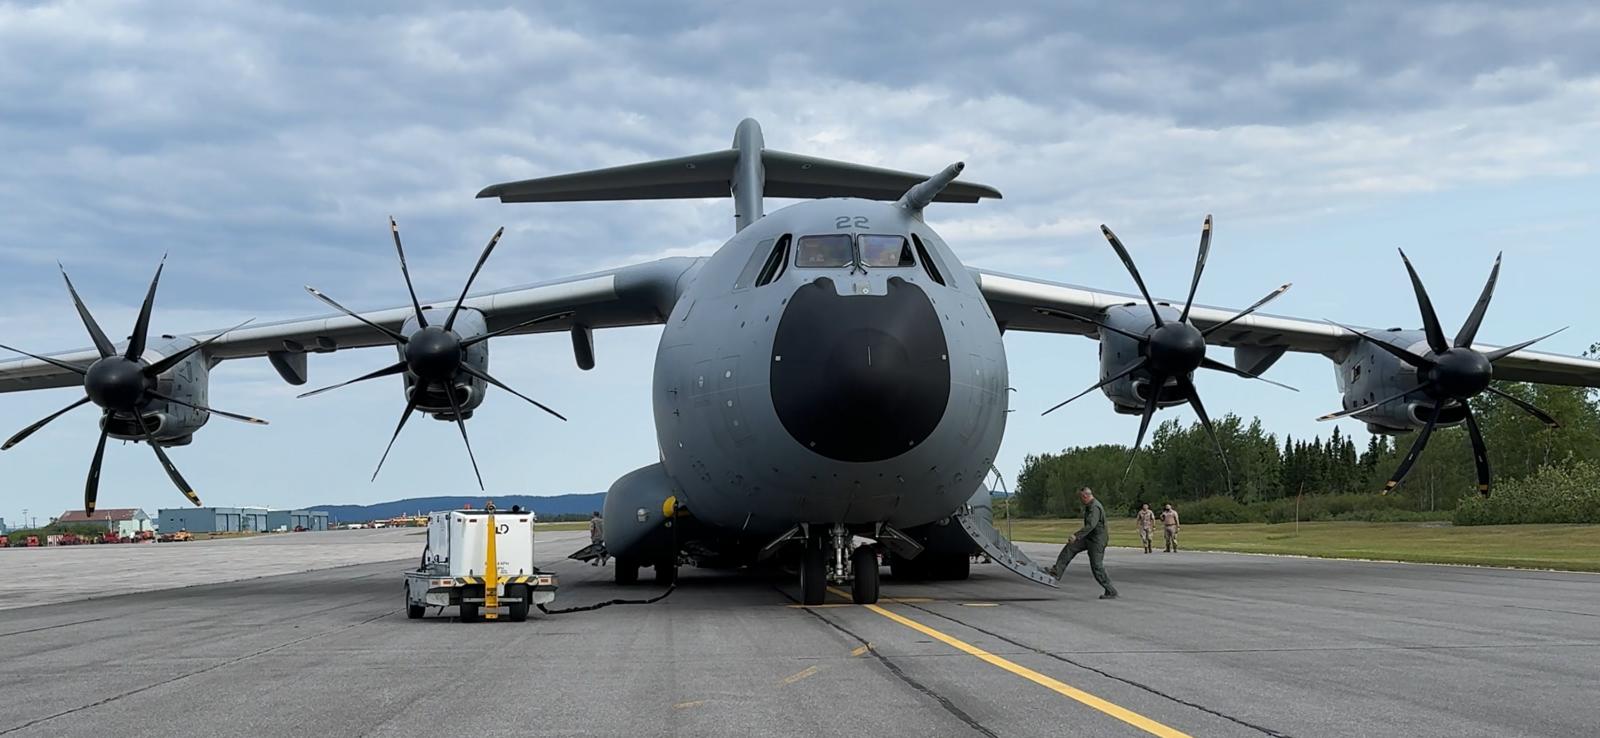 Arrival of the A400